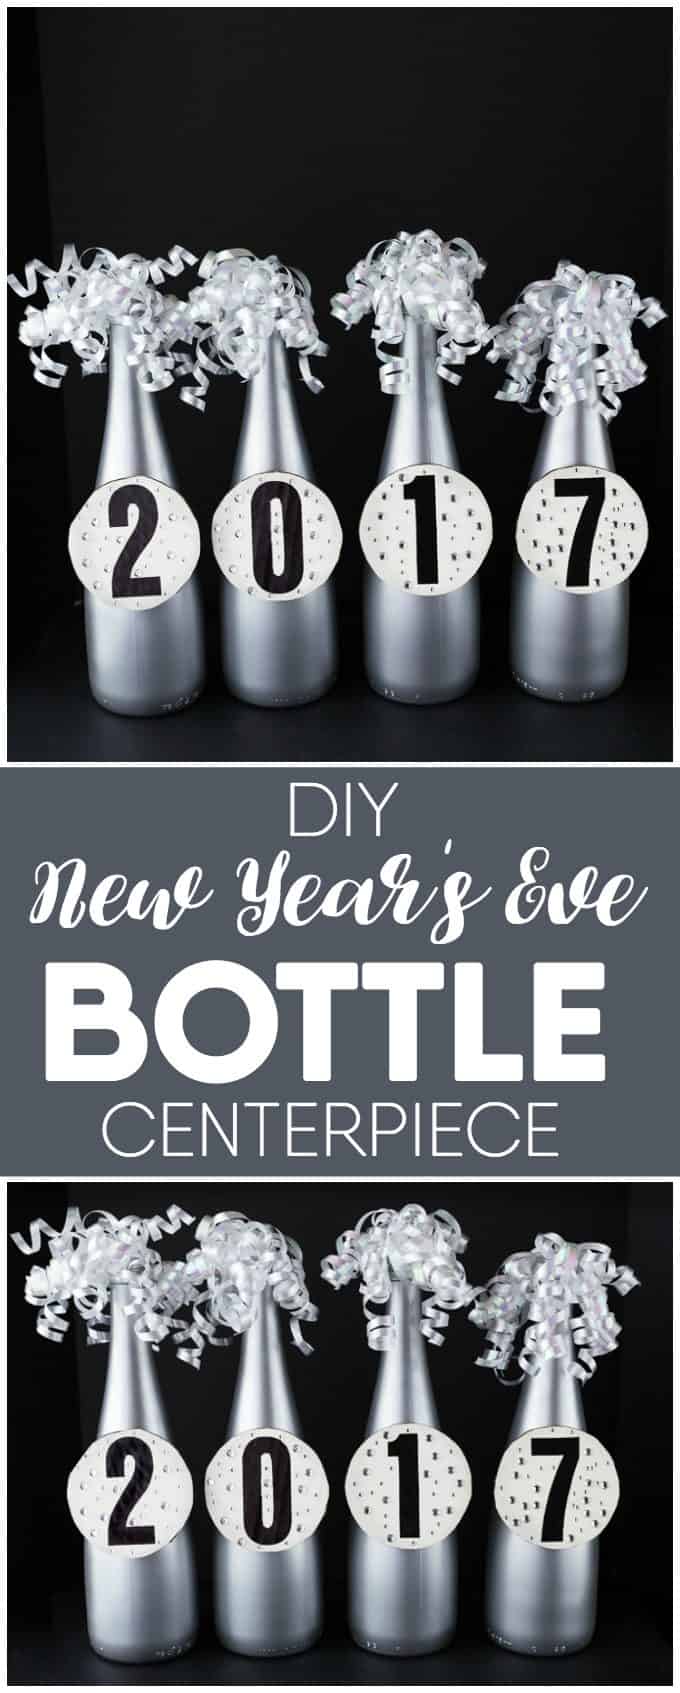 DIY New Year's Eve Bottle Centerpiece - Simple to make and looks so sharp. An easy way to add some flair to your New Year's party.